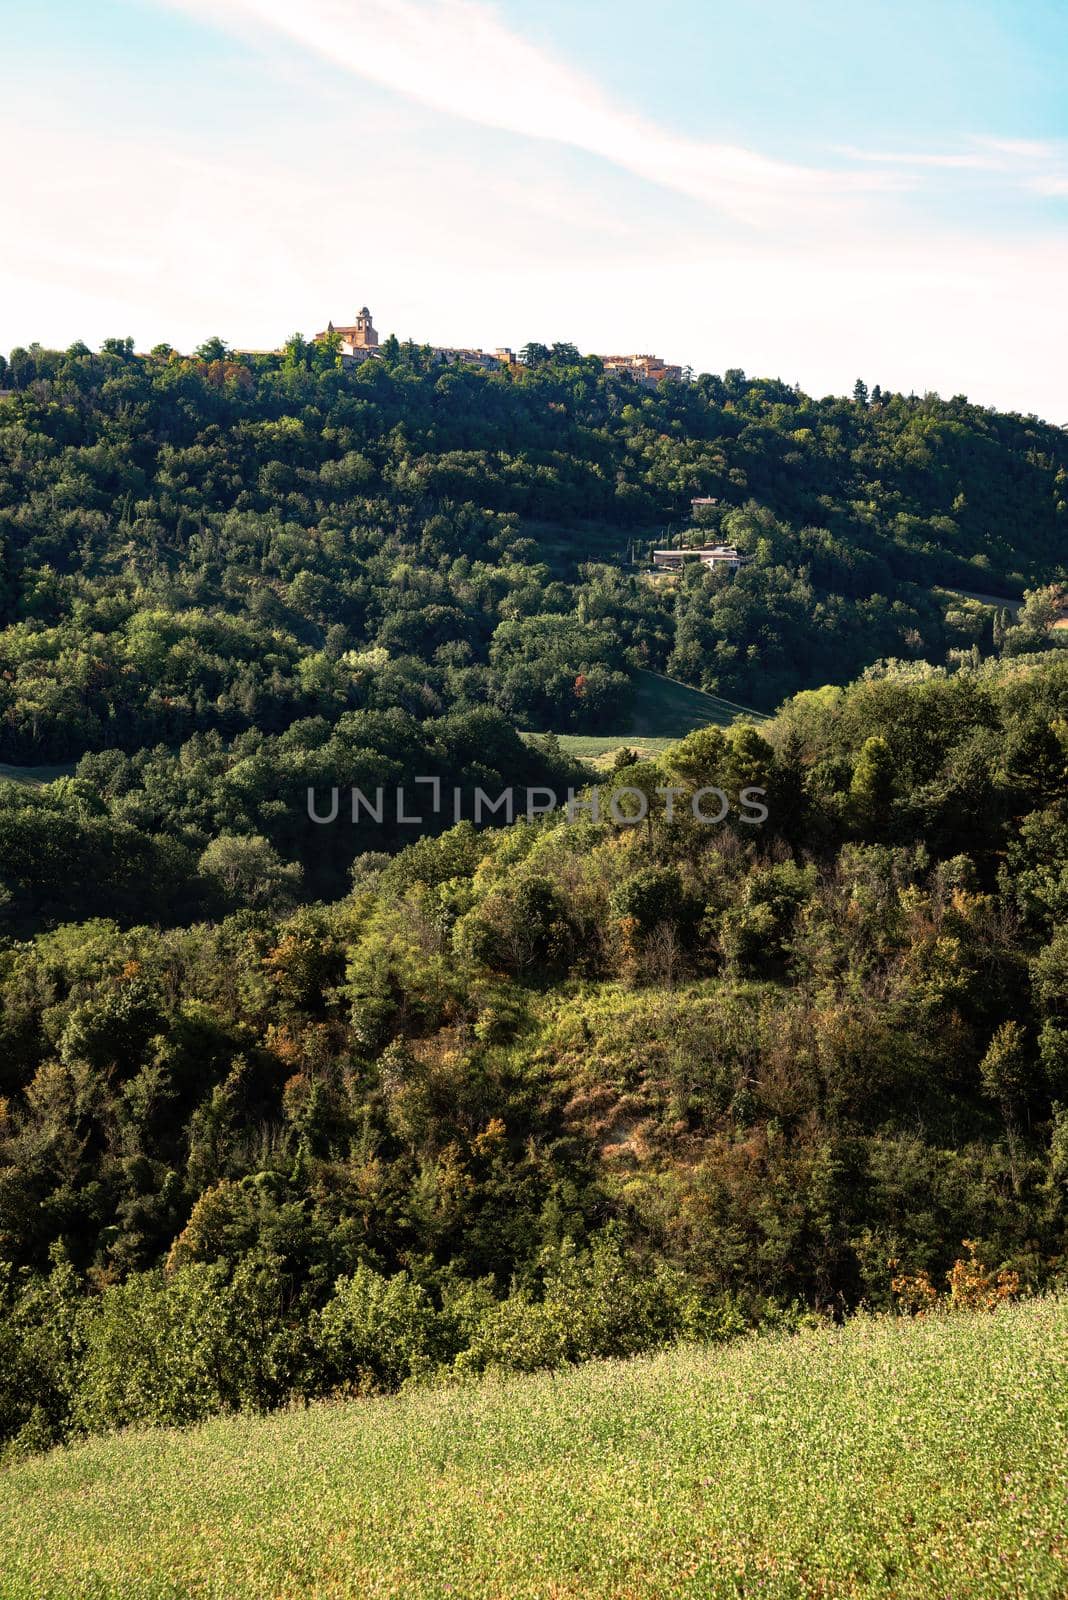 View of fields under Belvedere Fogliense, Region Marche of Italy. In the background appears the medieval city of Mondaino